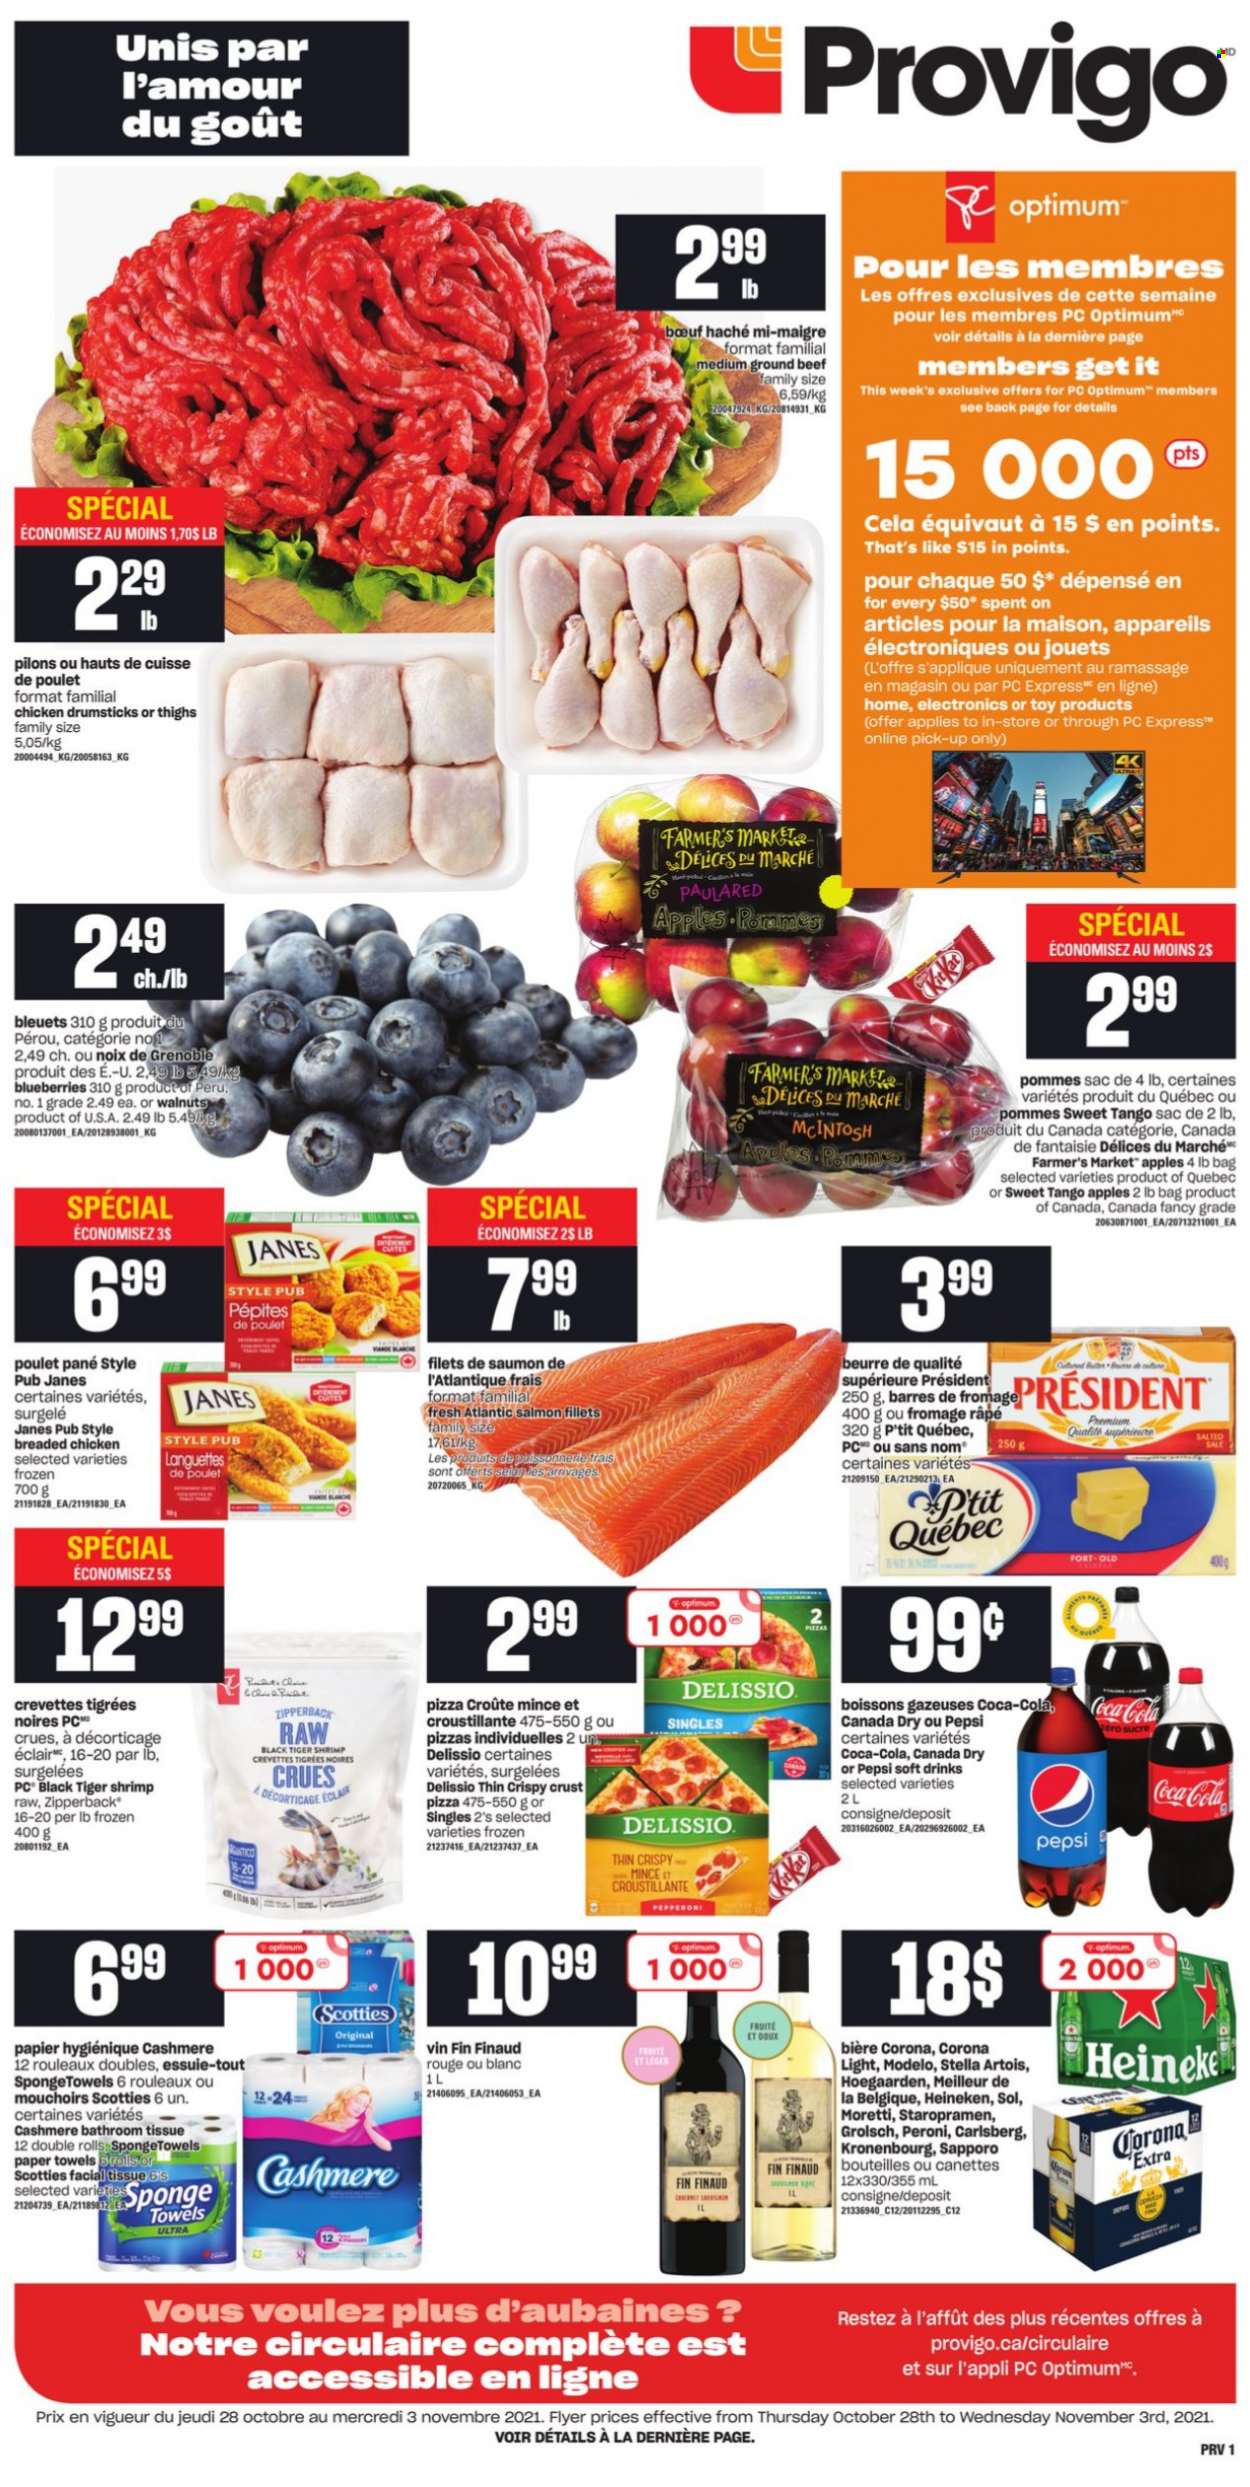 thumbnail - Provigo Flyer - October 28, 2021 - November 03, 2021 - Sales products - apples, blueberries, salmon, salmon fillet, shrimps, pizza, fried chicken, pepperoni, Président, walnuts, Canada Dry, Coca-Cola, Pepsi, soft drink, beer, Corona Extra, Heineken, Carlsberg, Peroni, Sol, Grolsch, Modelo, chicken drumsticks, chicken, beef meat, ground beef, bath tissue, kitchen towels, paper towels, Stella Artois. Page 1.